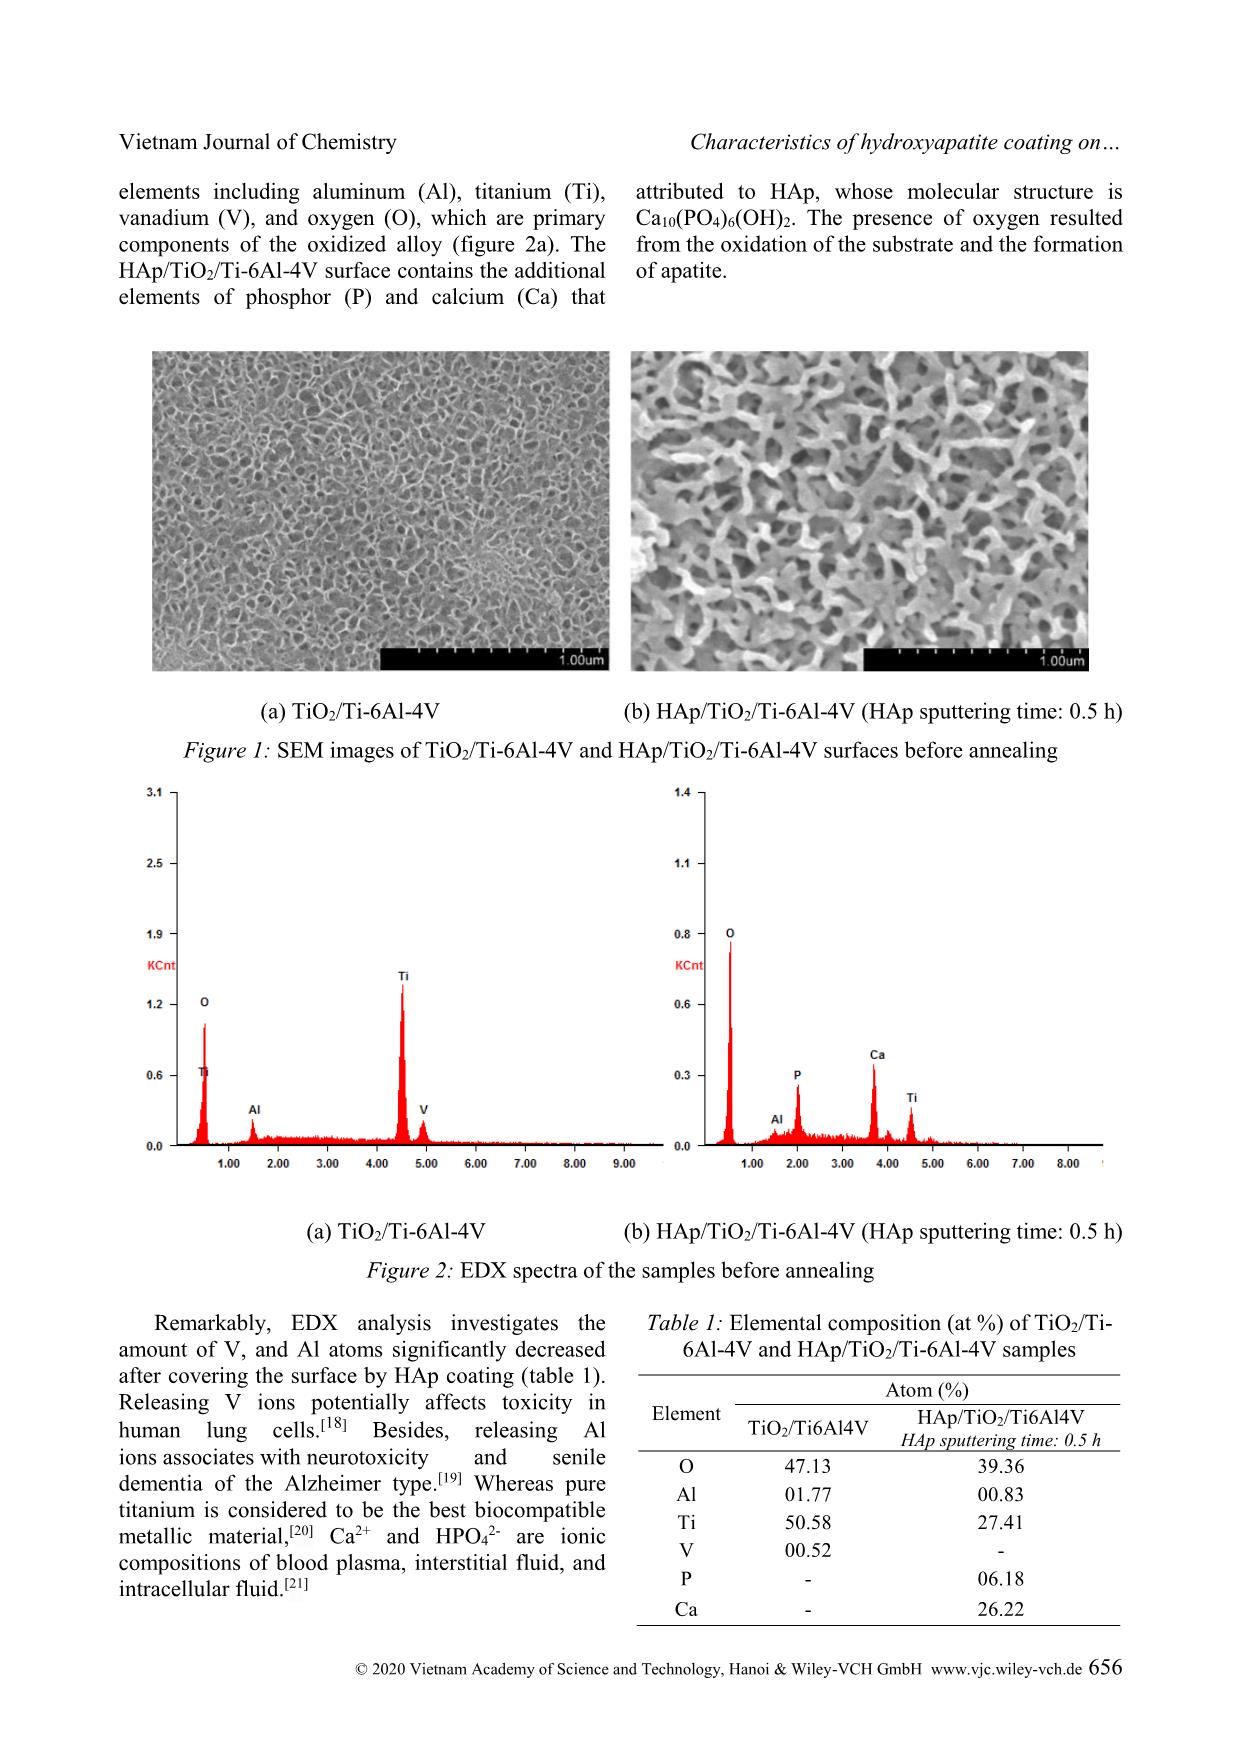 Characteristics of hydroxyapatite coating on Ti-6Al-4V substrate fabricated via sequent H2O2-oxidizing and RF-sputtering processes trang 3